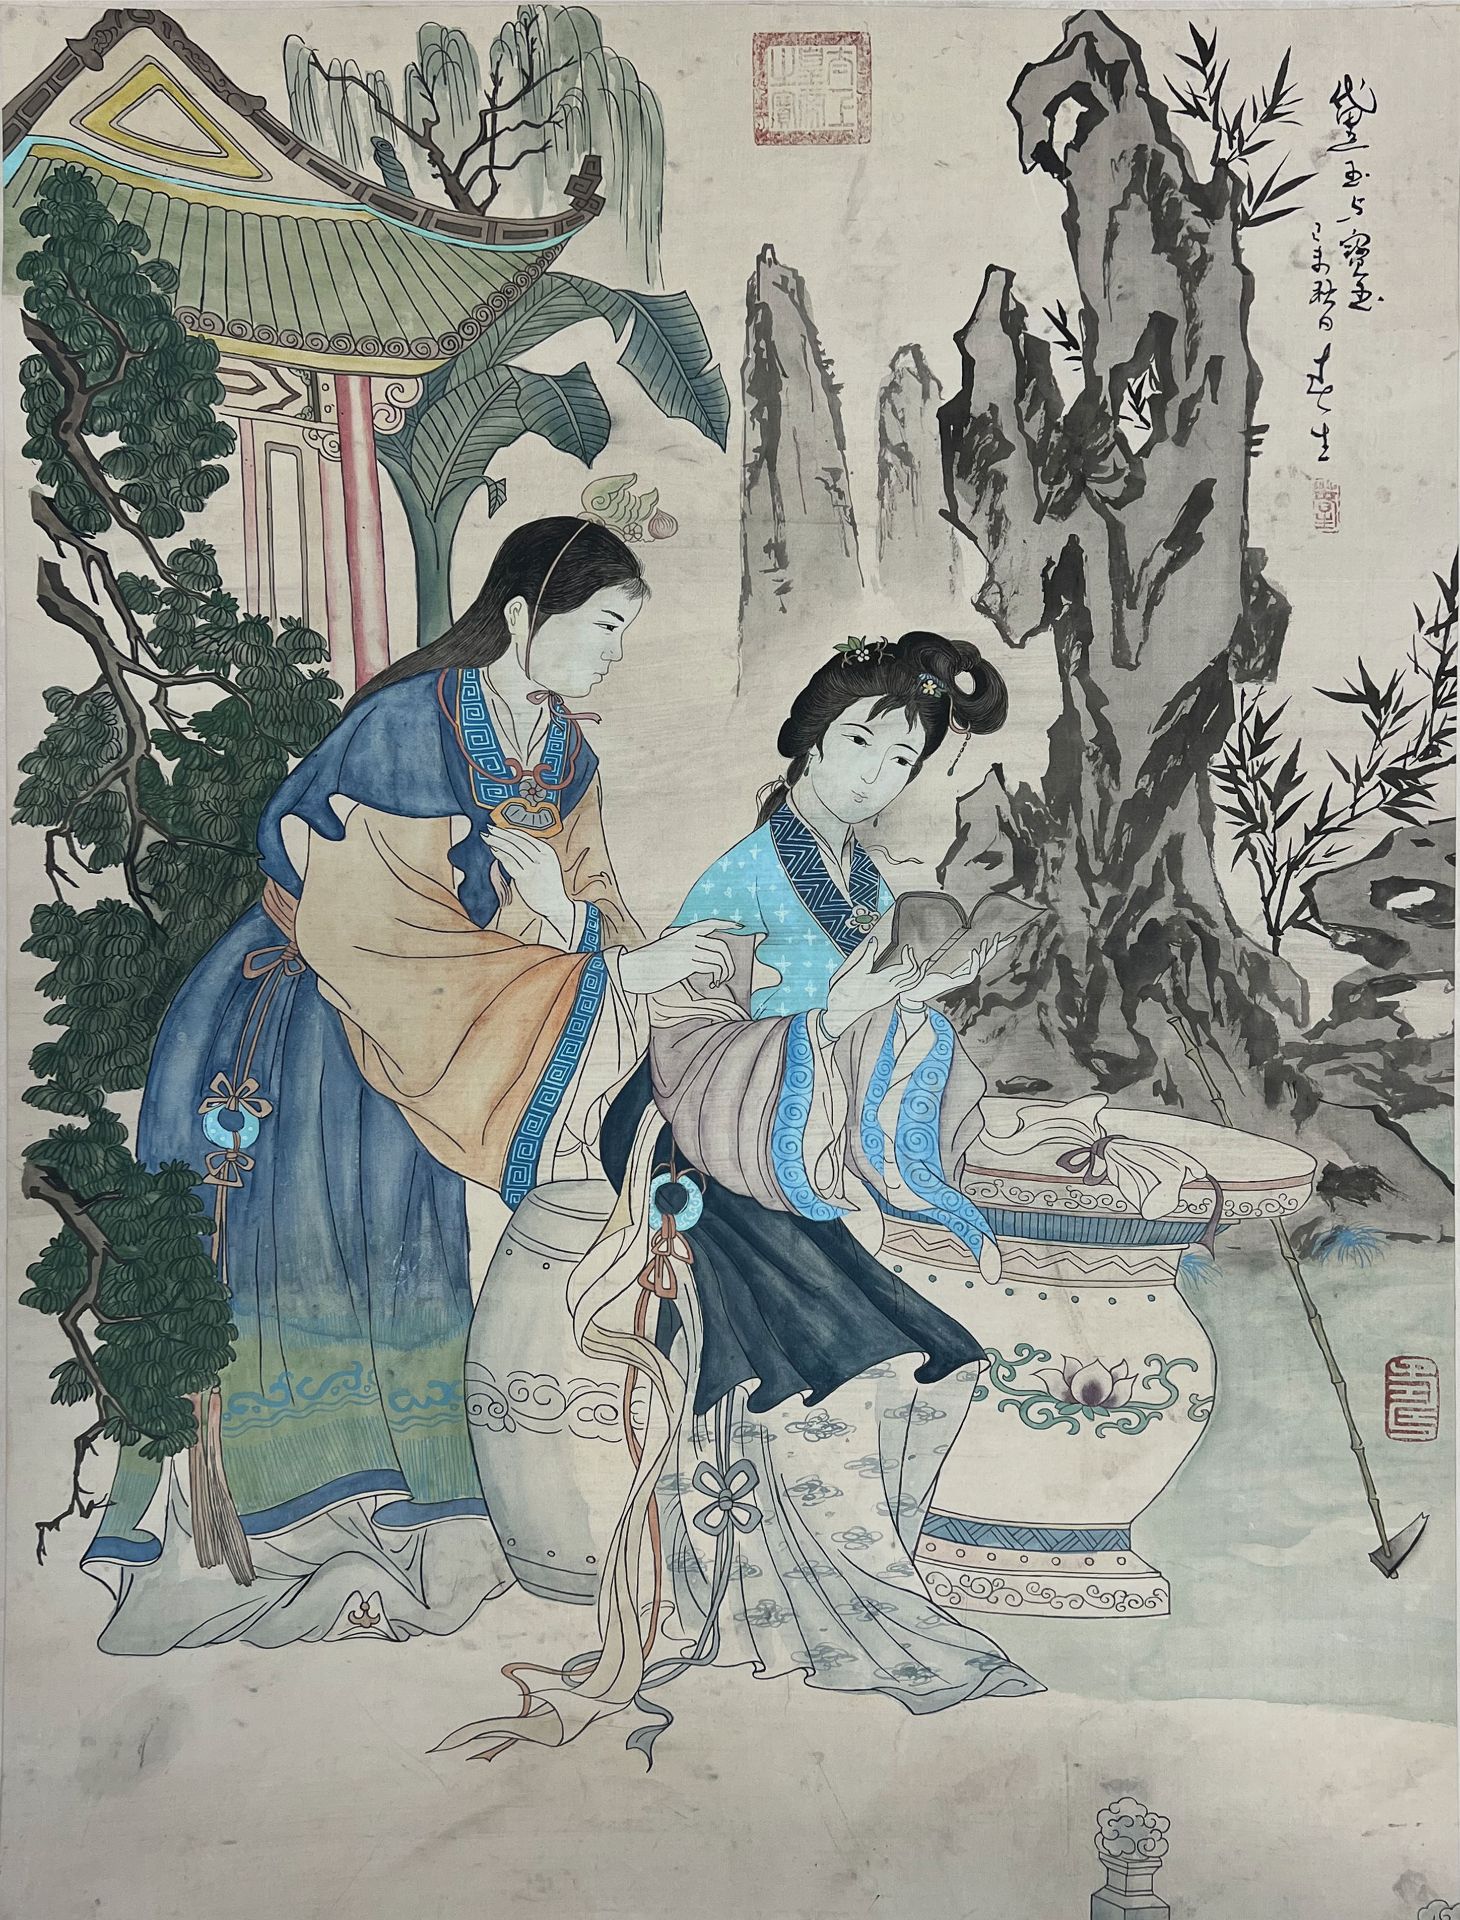 Us UNKNOWN ARTISTS (XX). Scroll painting. China. "The Dream of the Red Chamber". - Image 3 of 10